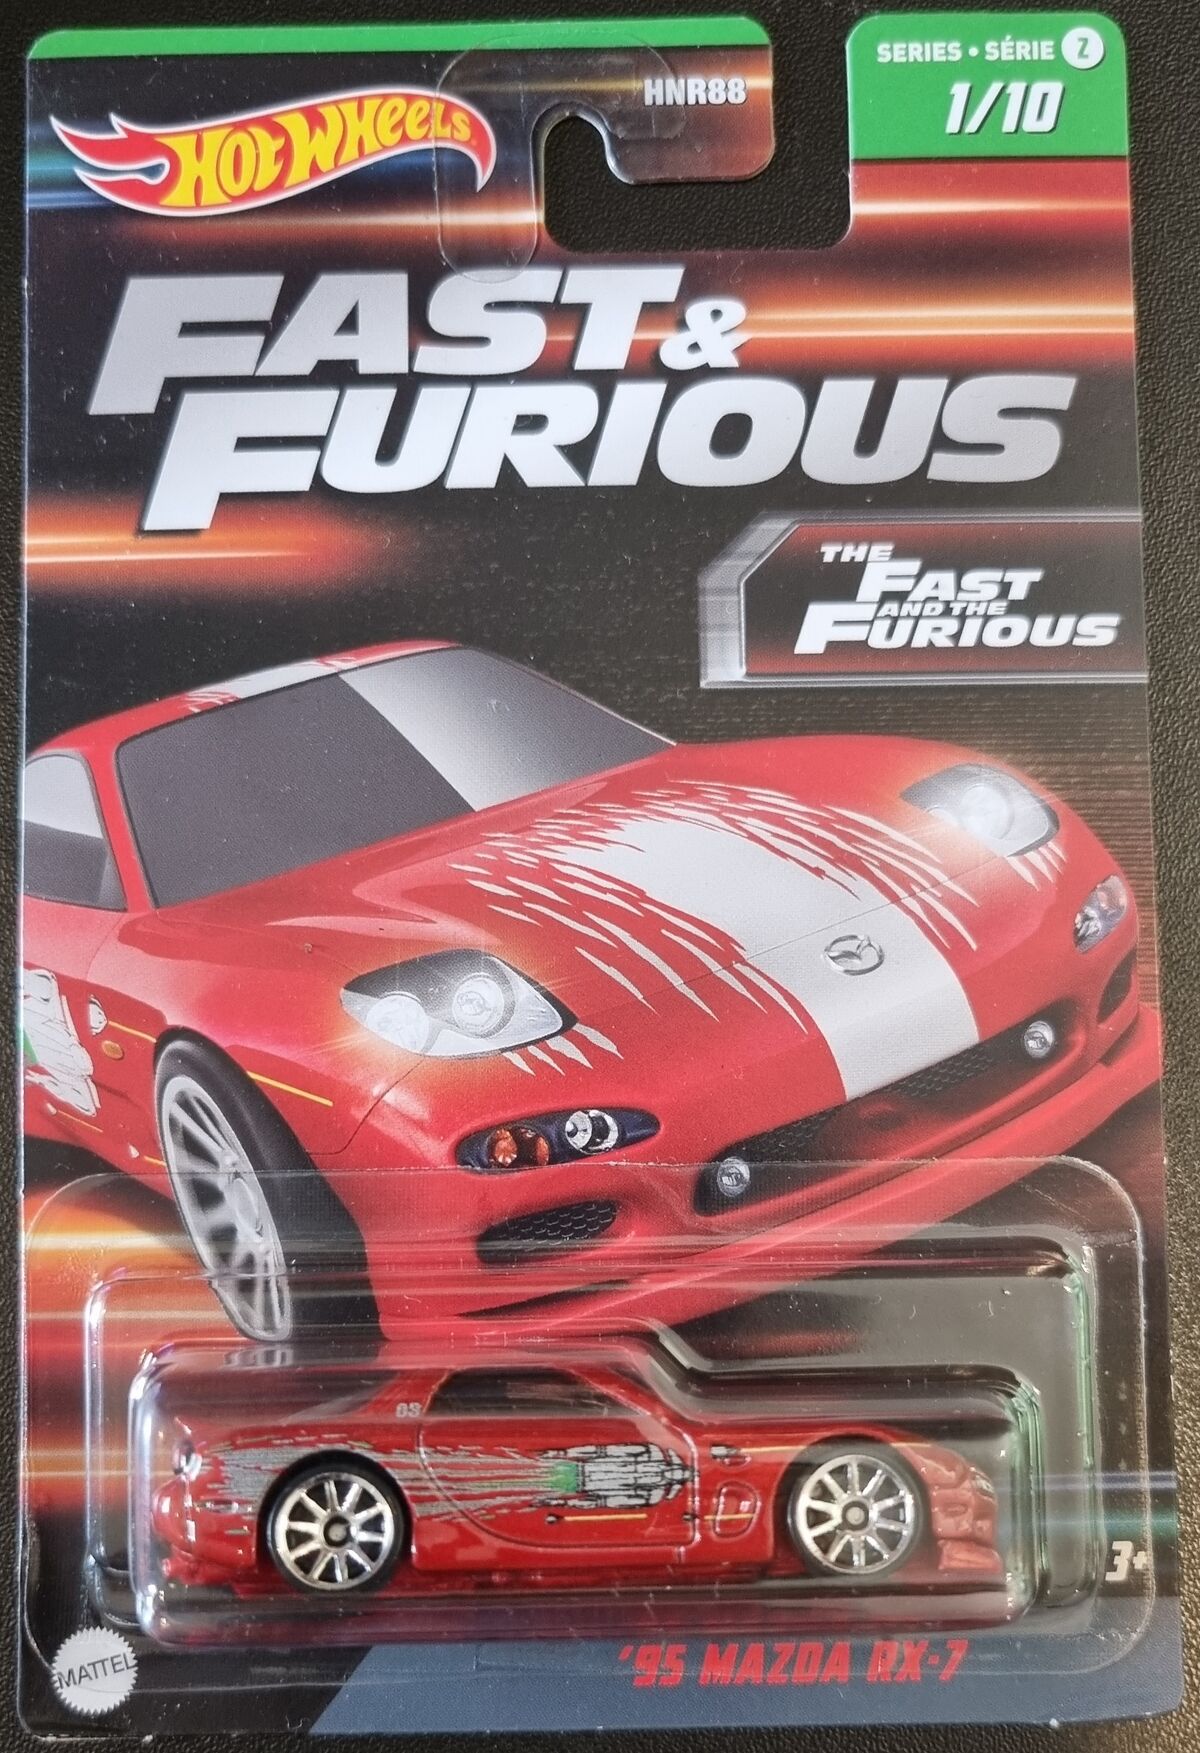  Hot Wheels Fast & Furious Bundle, 5 Premium Vehicles from Fast  & Furious Movie Series, 1:64 Scale Die-Cast Vehicle Collection, Toys for 3  Year Olds and Up [ Exclusive] : Toys